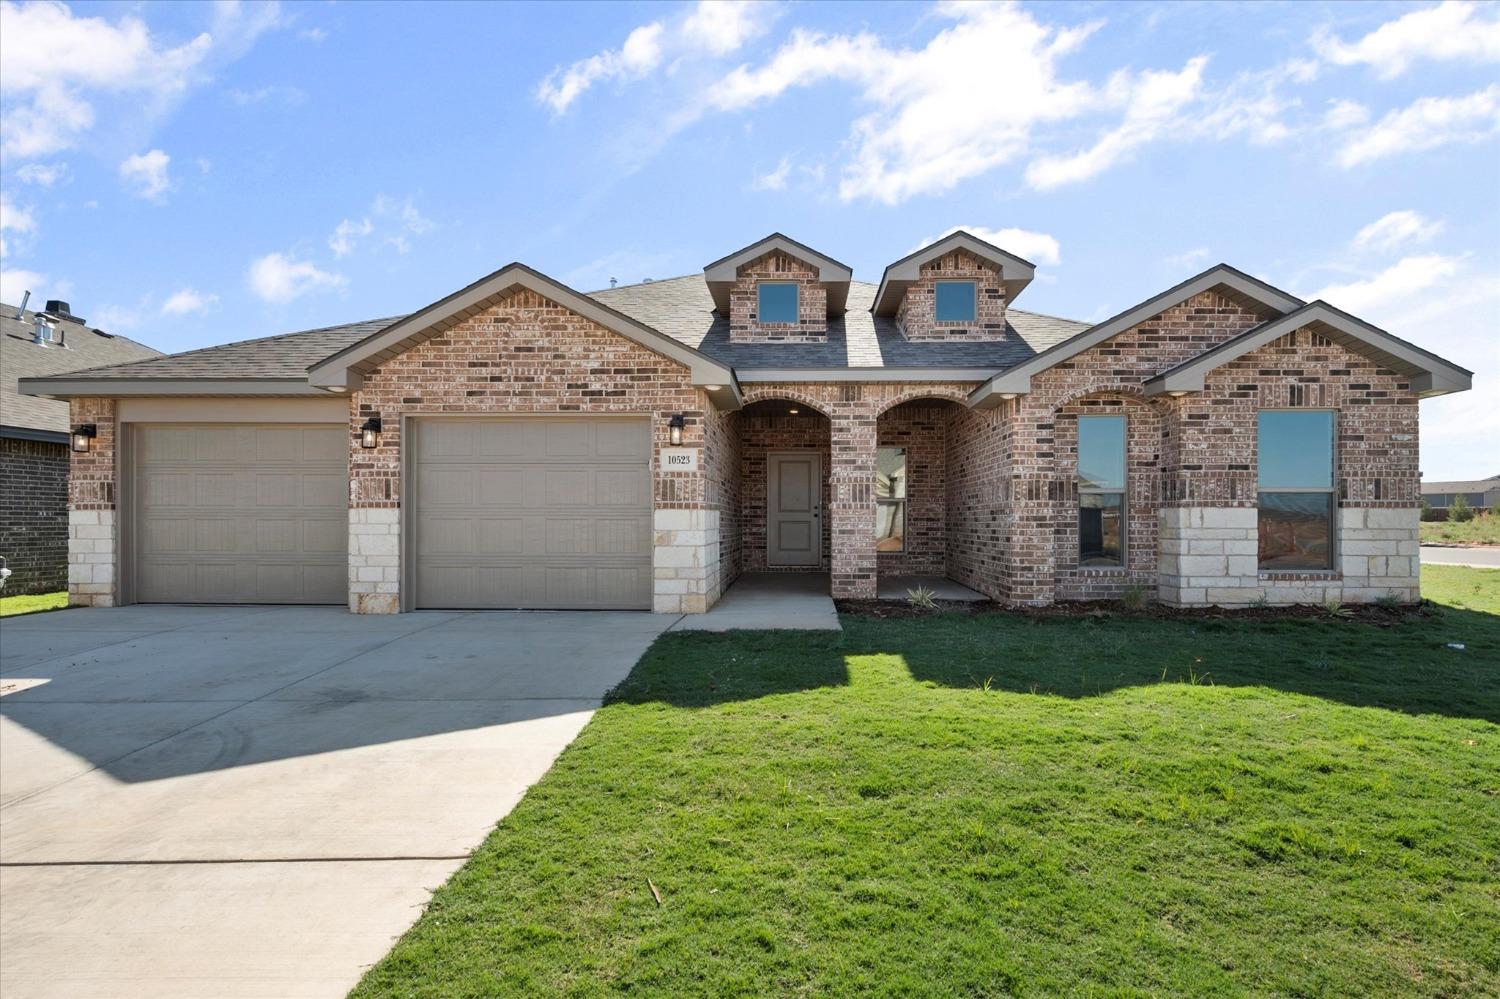 Up to $12K + 5.99% interest rate if we close before 11/20! Located in the Abbey Glenn community, this home is walking distance from United Supermarkets and minutes from H-E-B. A double arch front porch and stone accents will immediately grab your eye. As you walk through the front door, a grand entryway leads into a spacious and bright living space, coupled with a large kitchen island and breakfast nook. Complete with a flex space that offers functionality as a playroom or luxury as a formal dining space, you'll be well on your way to being the premier hosting destination. When it's time to relax, the secluded master suite and standalone tub provide a slice of paradise. If you aren't sold on this 4 bedroom, 3 bathroom new build yet, the full-laundry room, additional storage areas, in-law suite and extra-wide 2-car garage will seal the deal. To make this new home yours, contact us today!